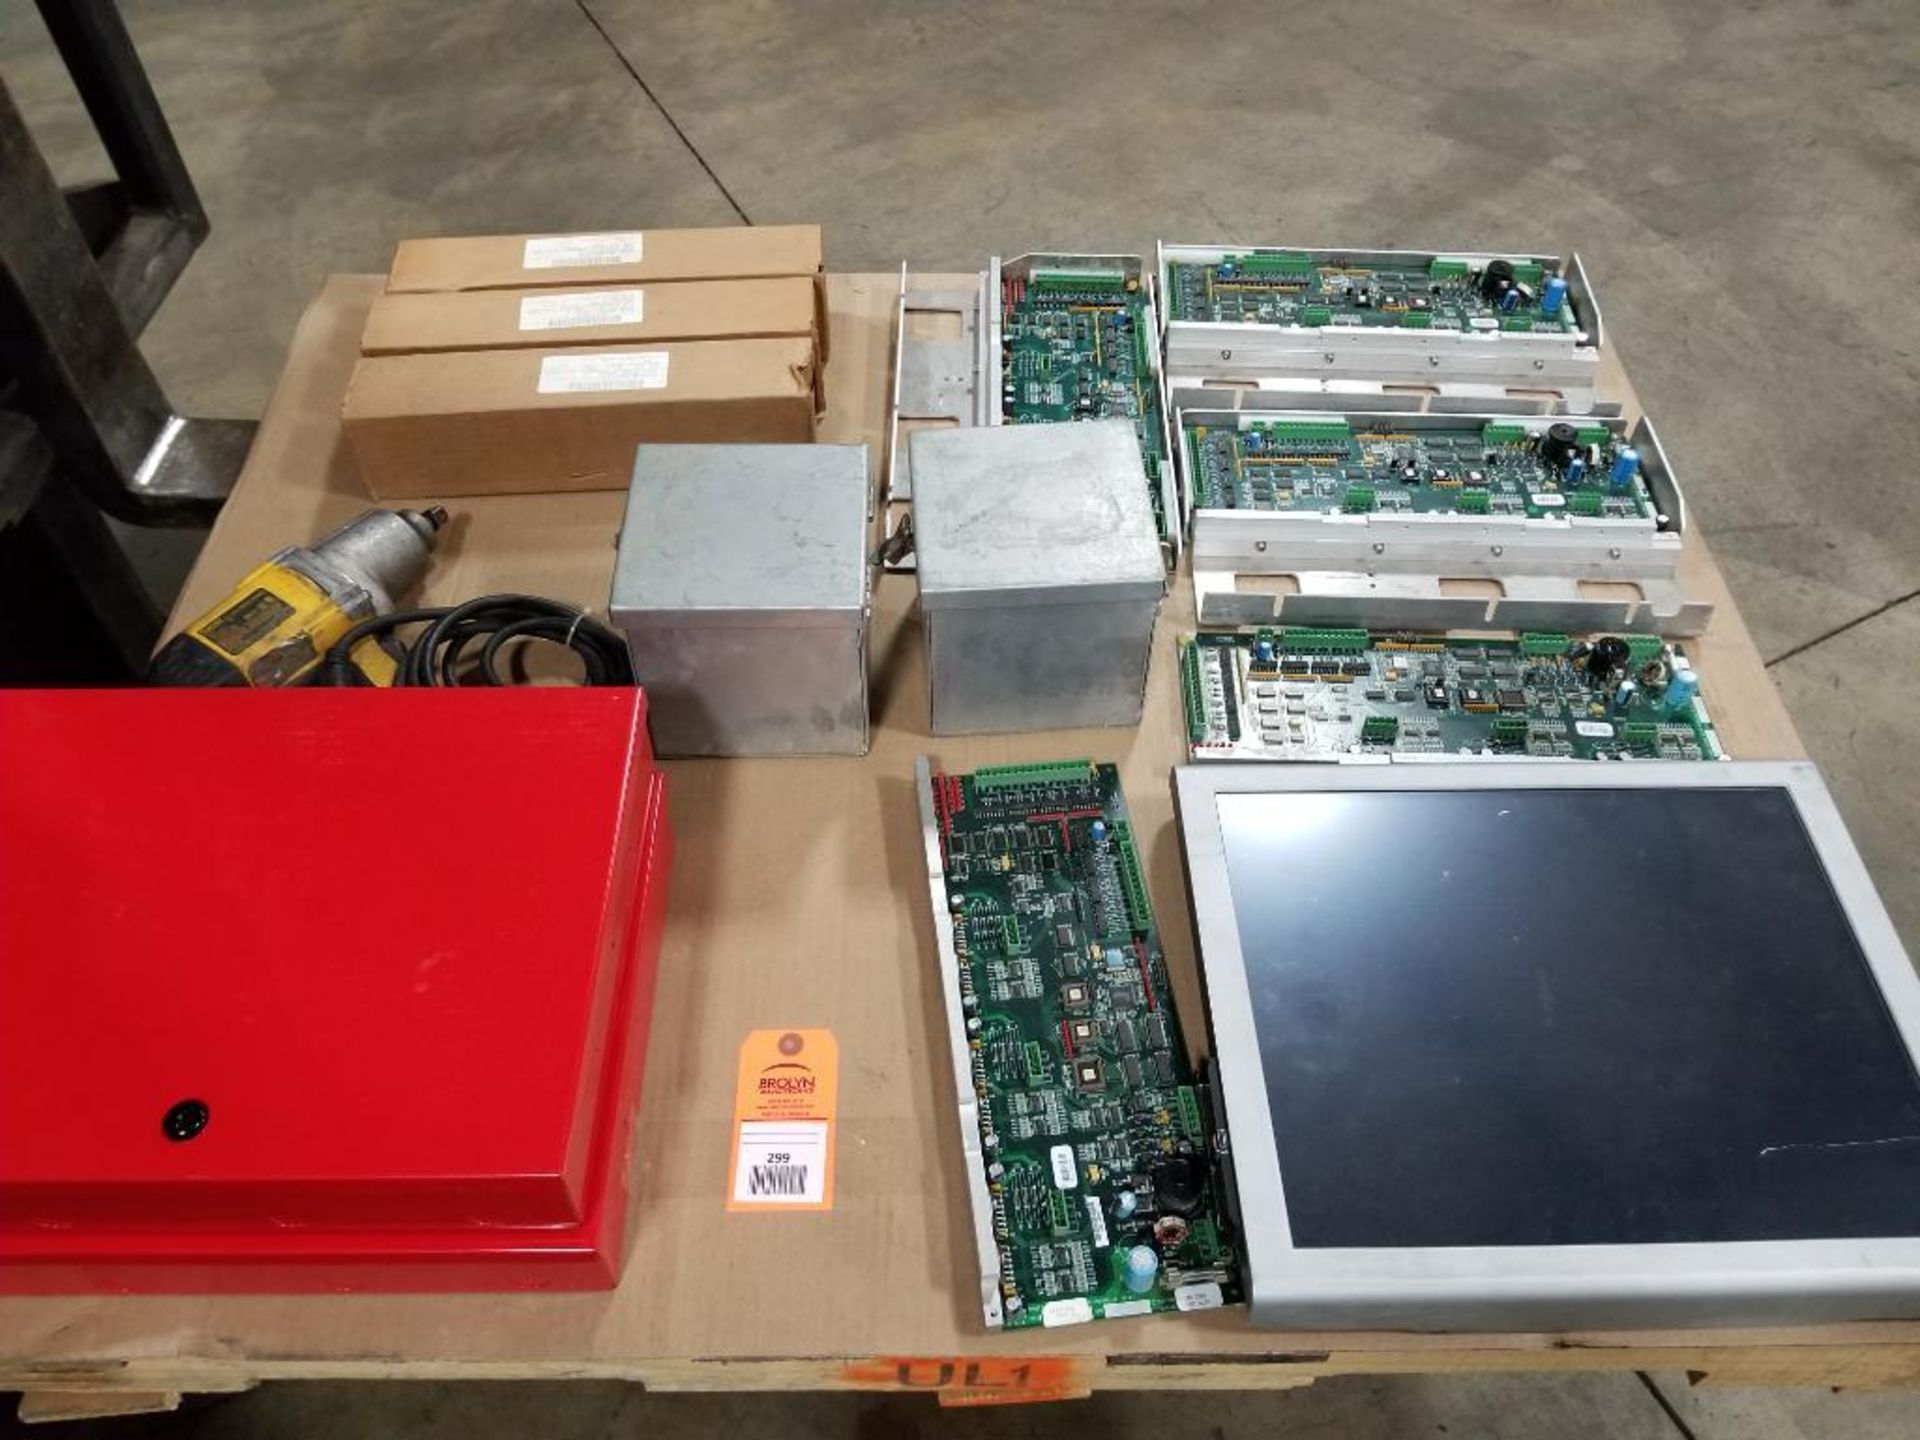 Pallet of assorted electrical. Enclosure box, control boards, monitor.